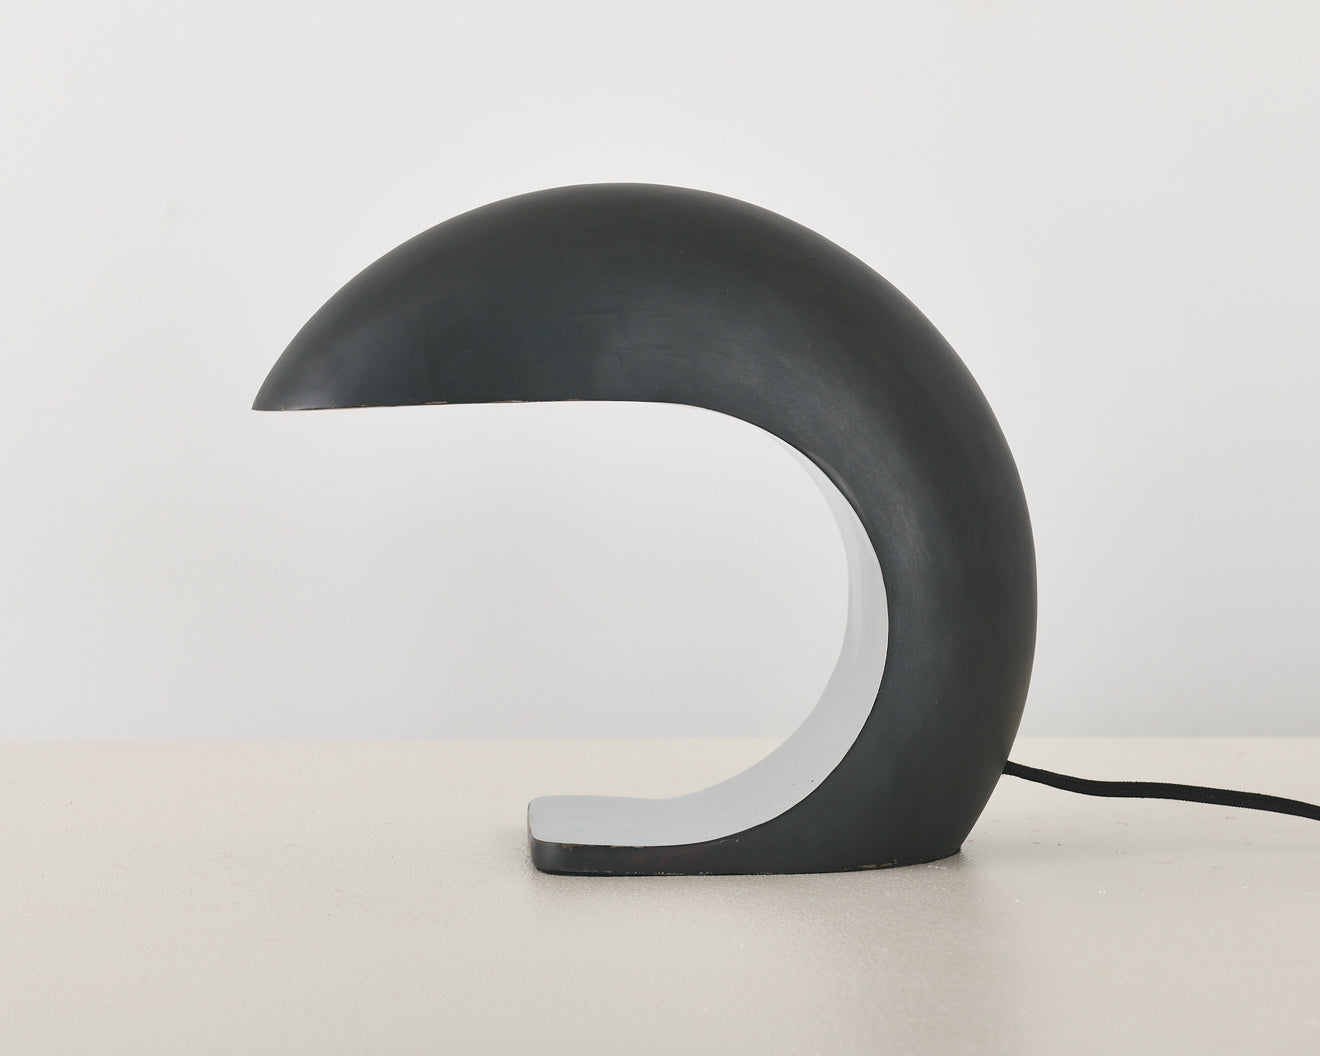 MEDIUM BRONZE AND STAINLESS NAUTILUS LAMP BY CHRISTOPHER KREILING